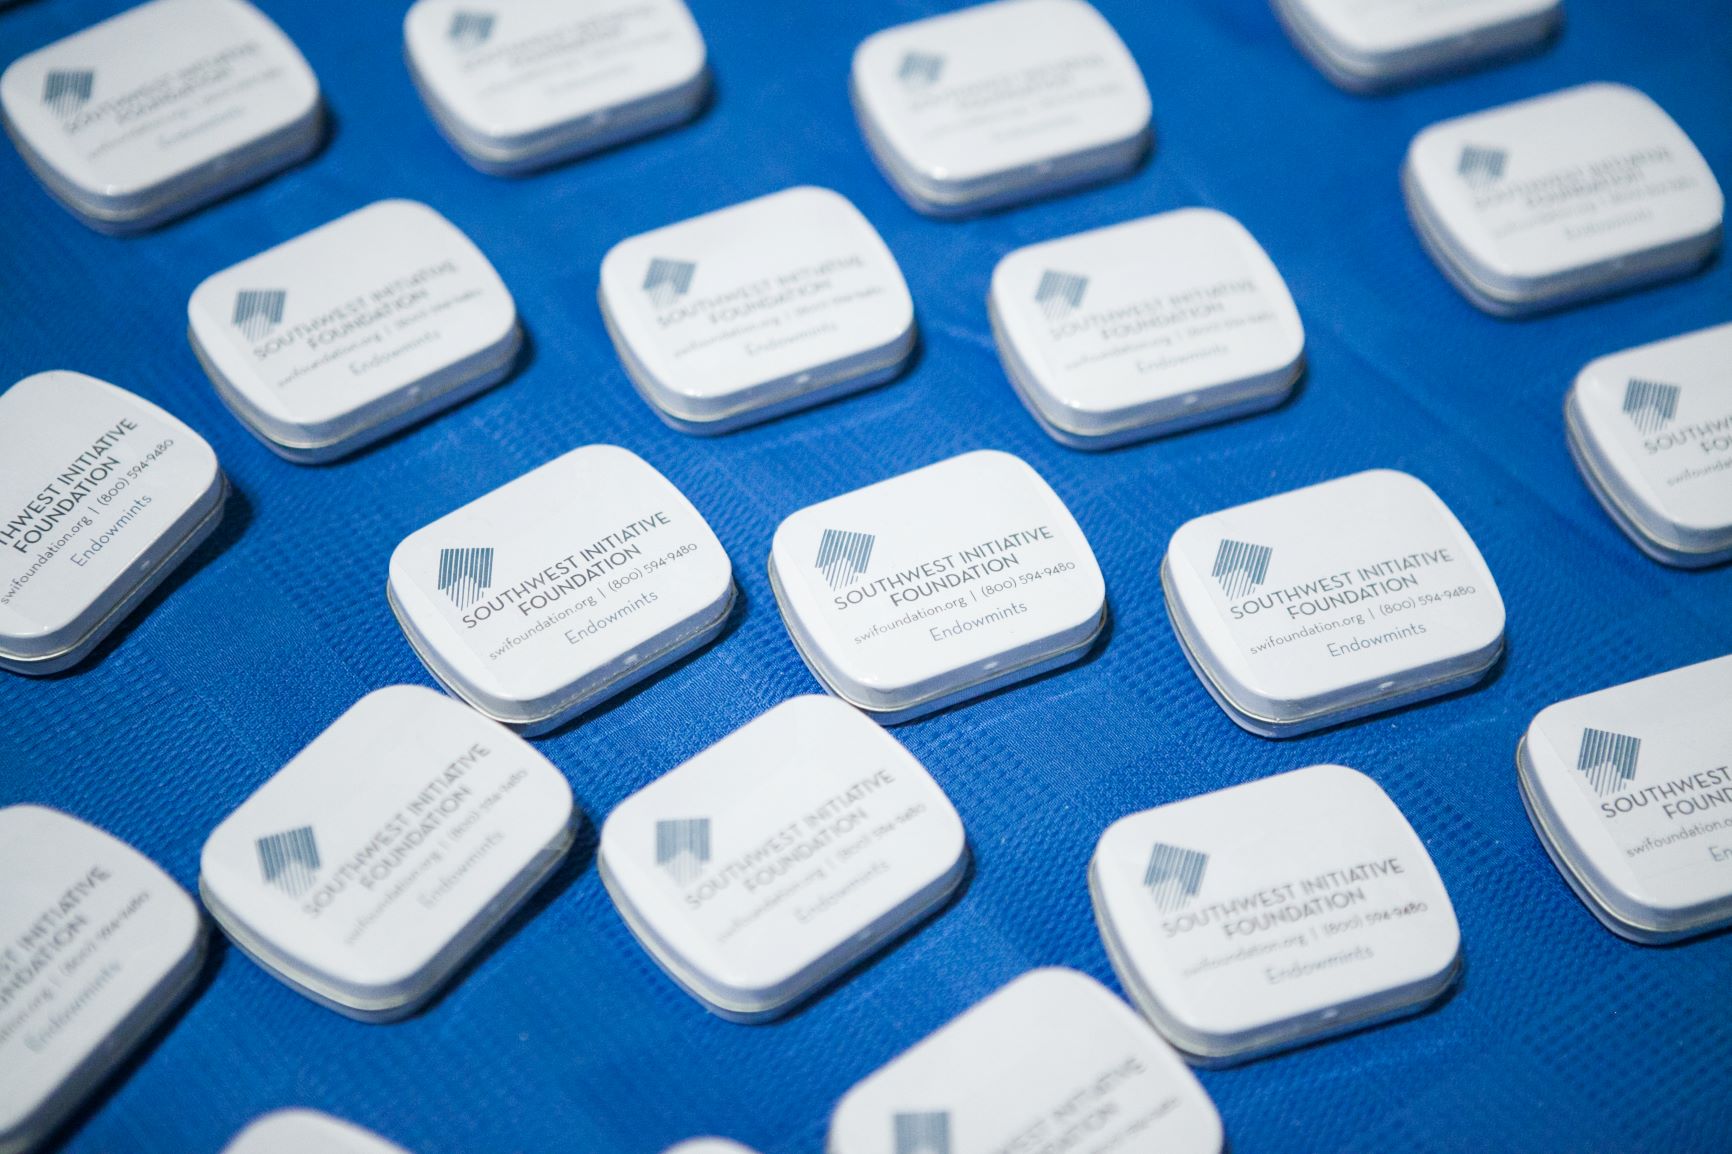 Small tins of mints with the SWIF logo emblazoned on the front are arranged in a pattern on a blue tablecloth